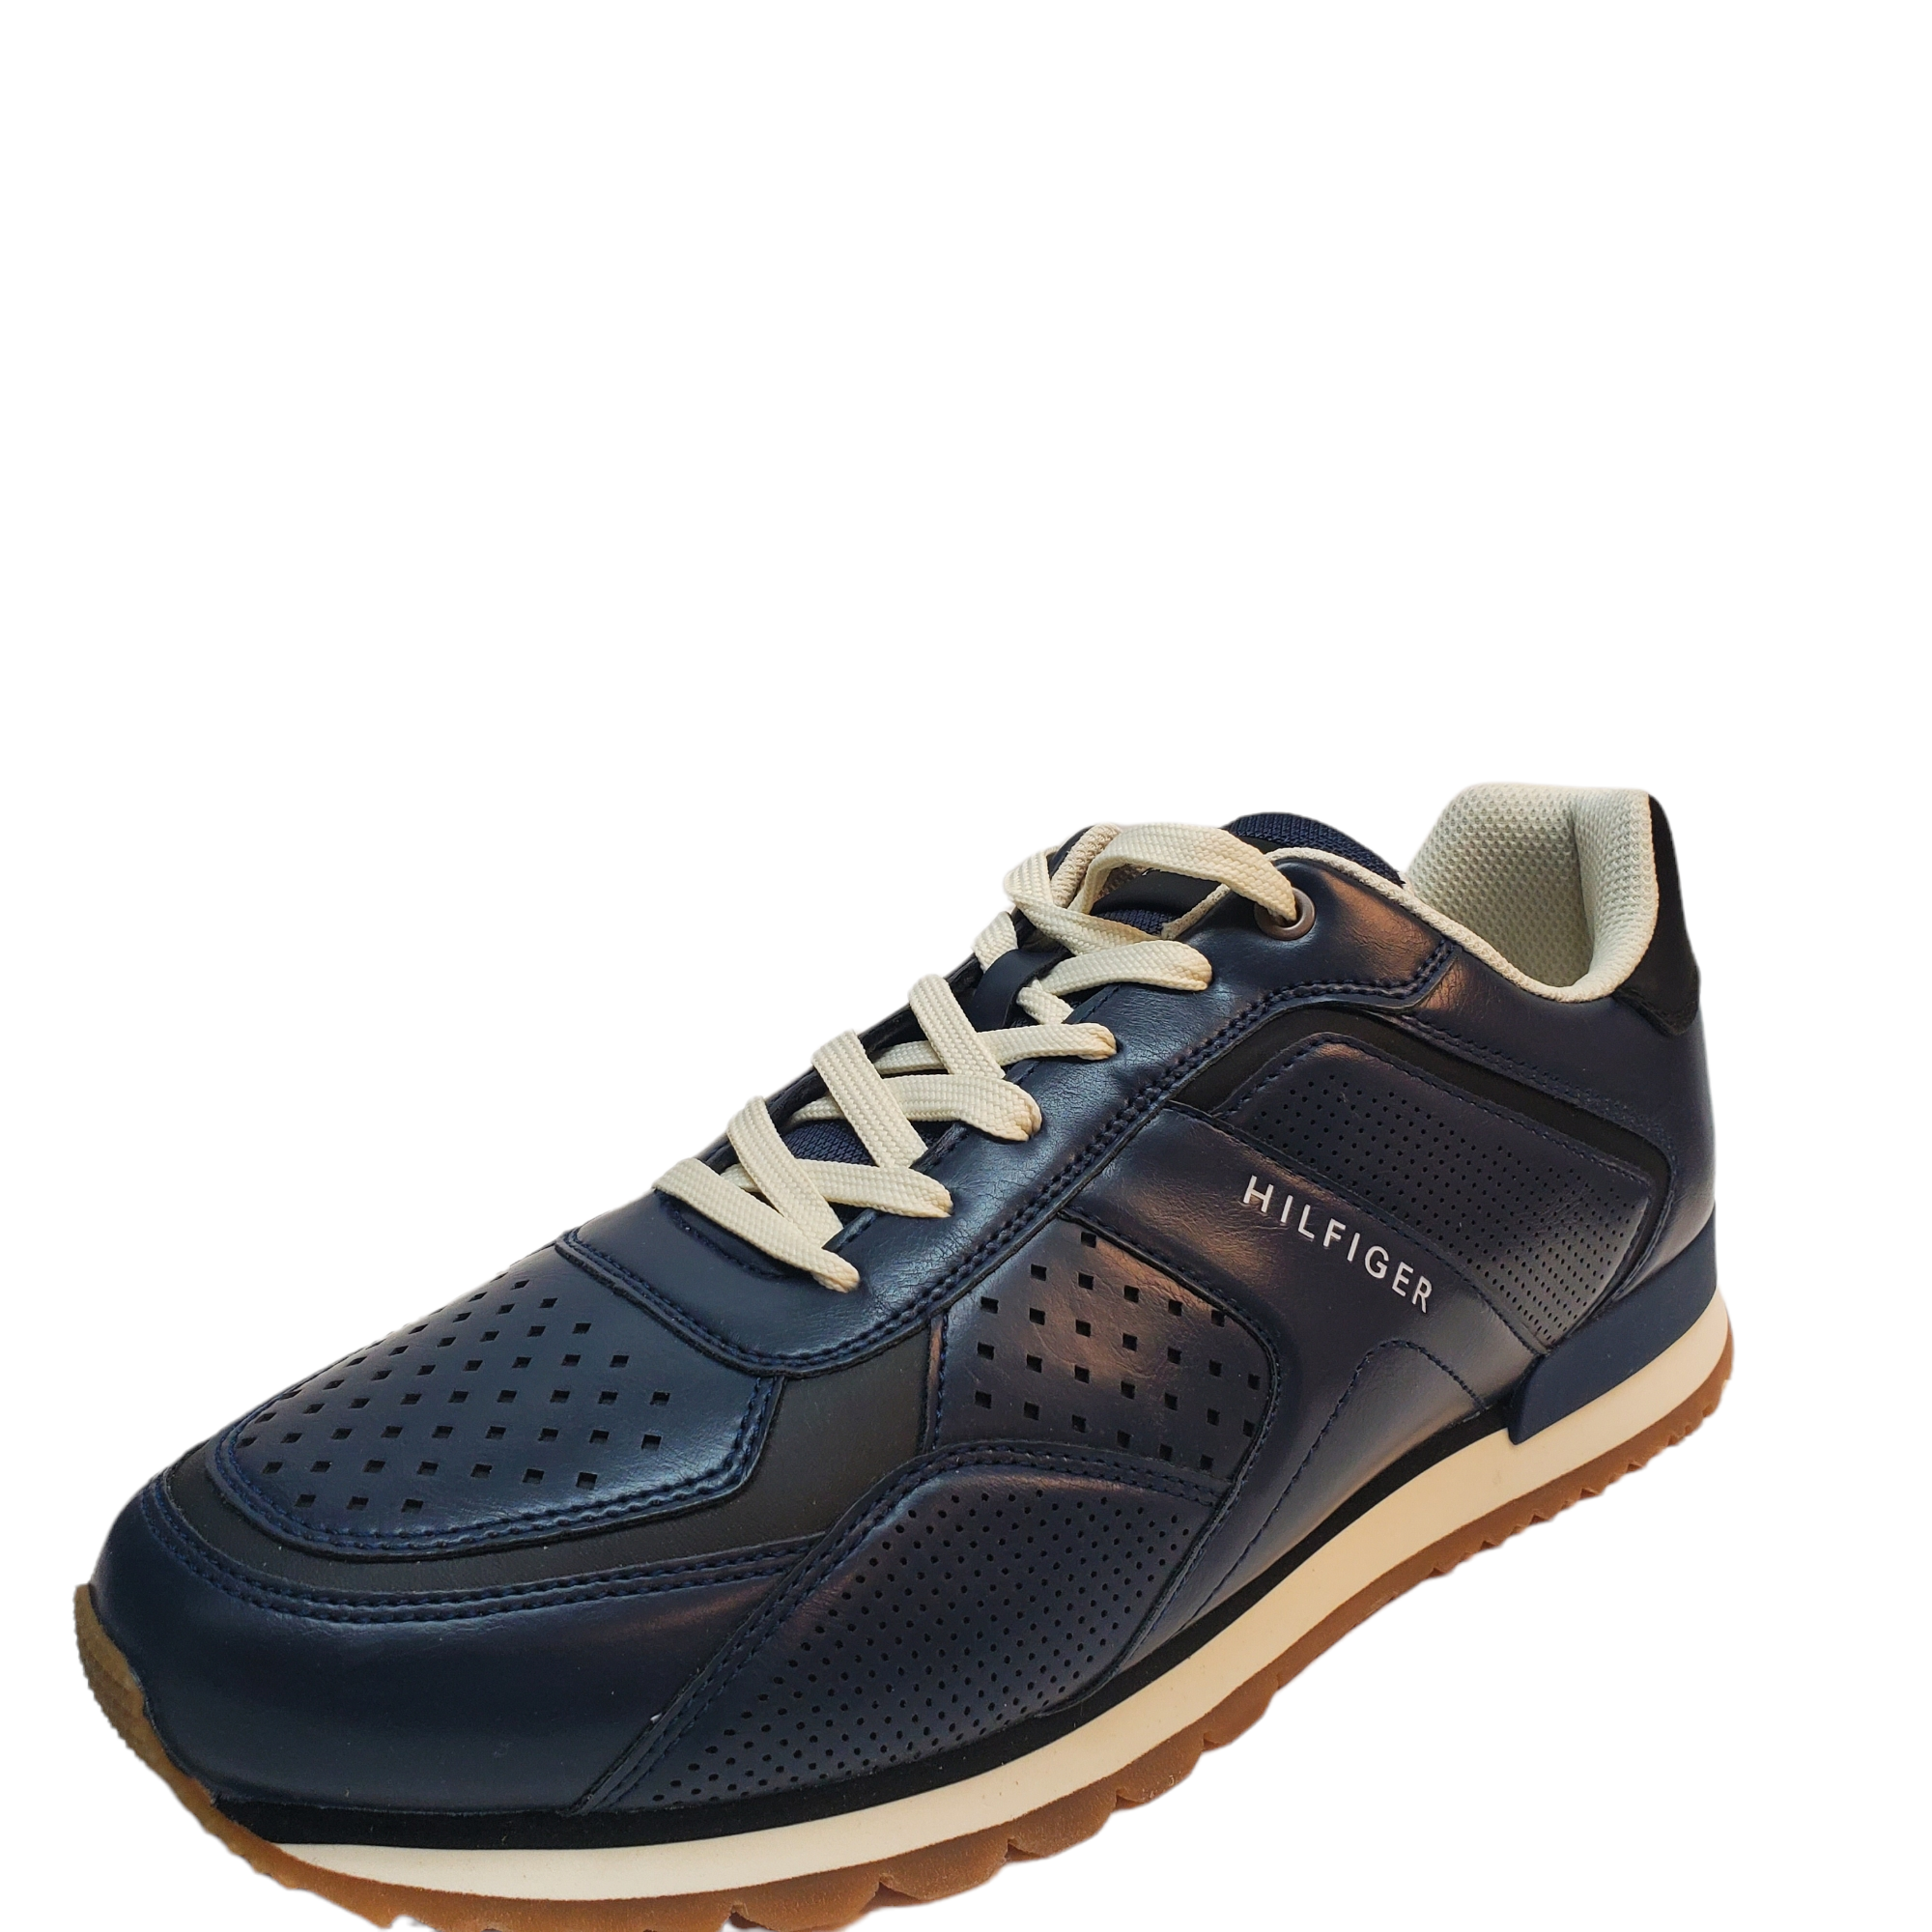 Hilfiger Men's Shoes Alistair Lace Blue Cushioned Sneakers 12M Affordable Designer Brands | Affordable Designer Brands